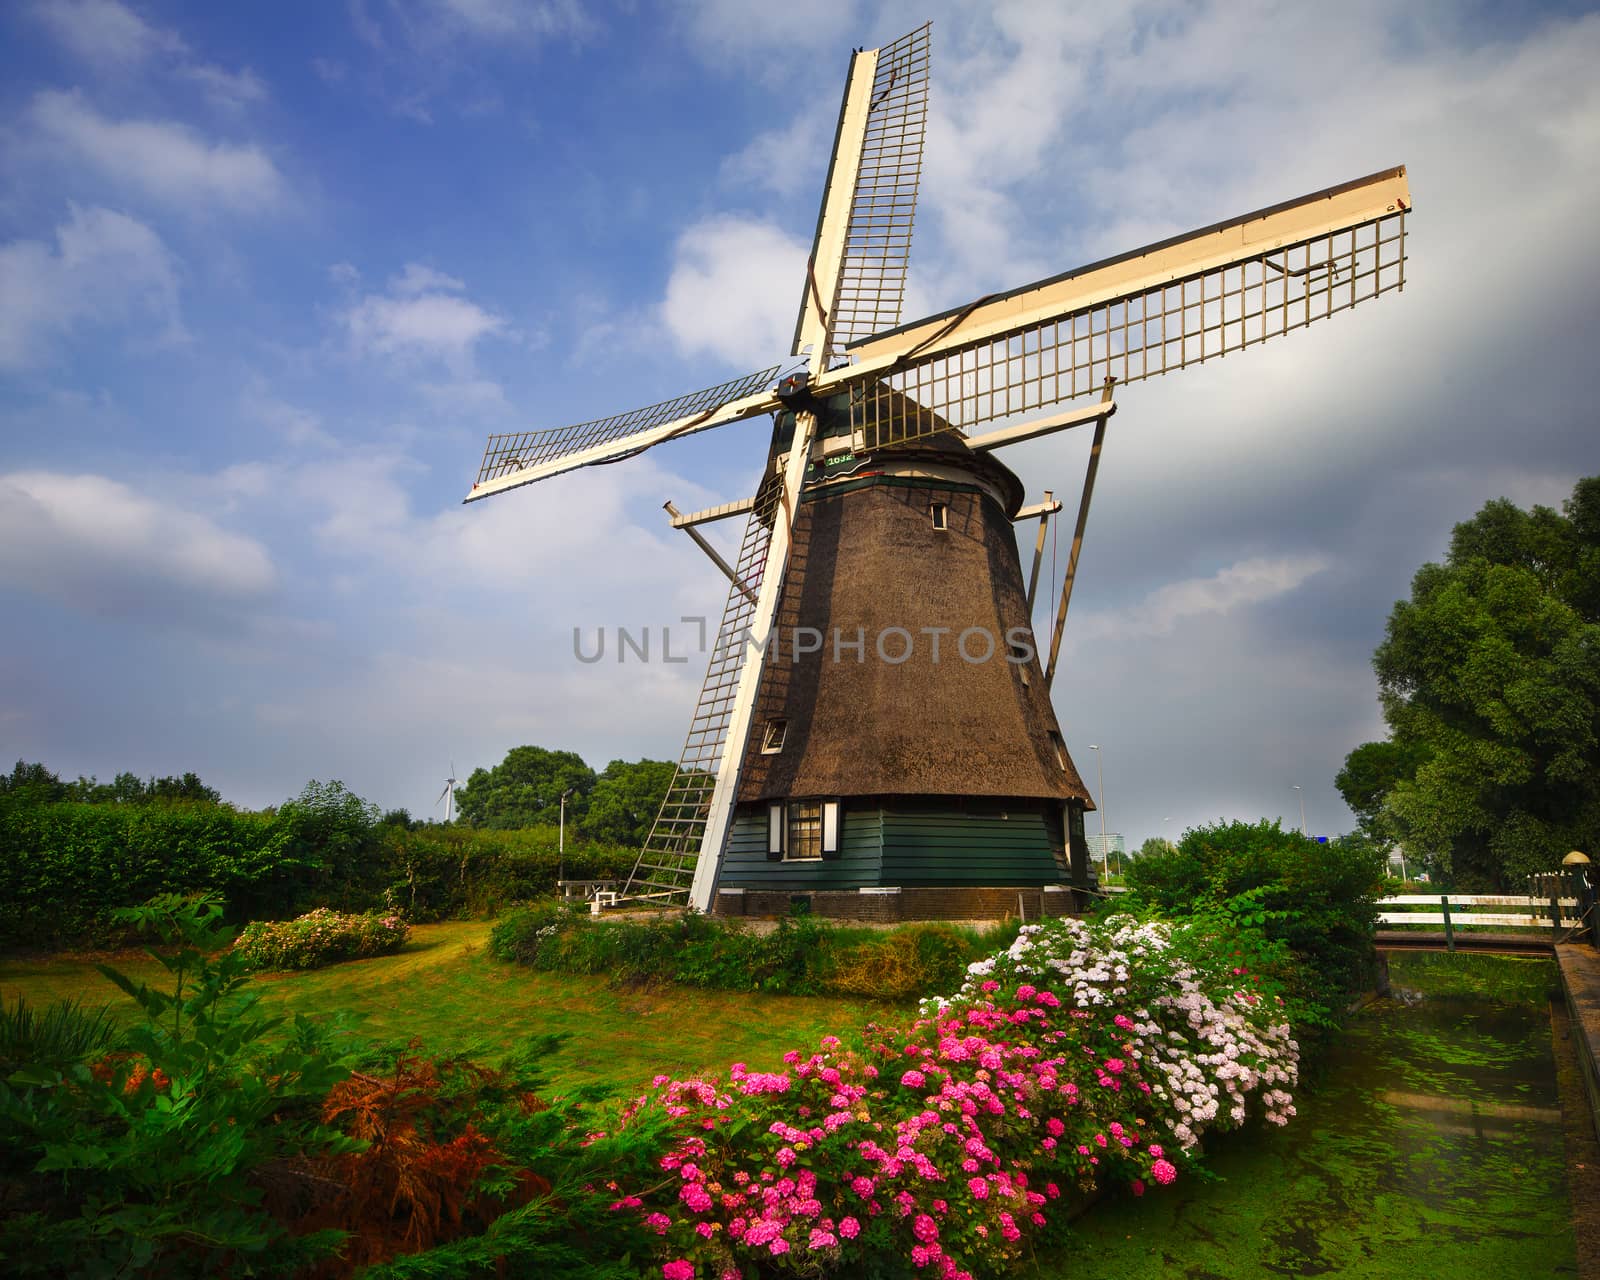 Amsterdam Windmill, Netherlands by adonis_abril